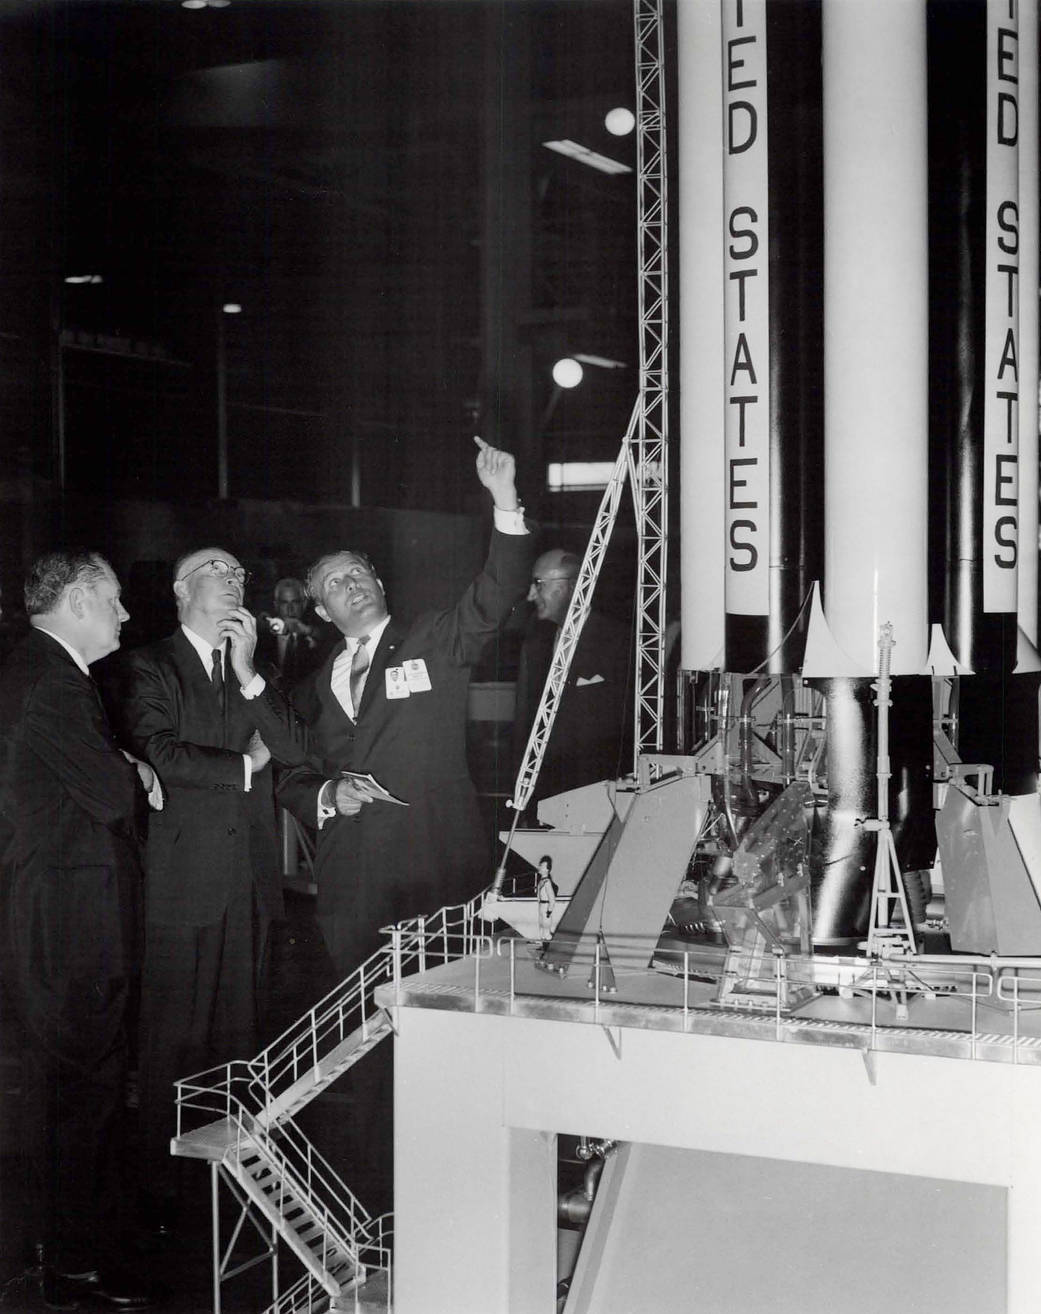 Dr. Wernher von Braun, Marshall’s first center director, shows President Dwight D. Eisenhower a model of the Saturn IB as they